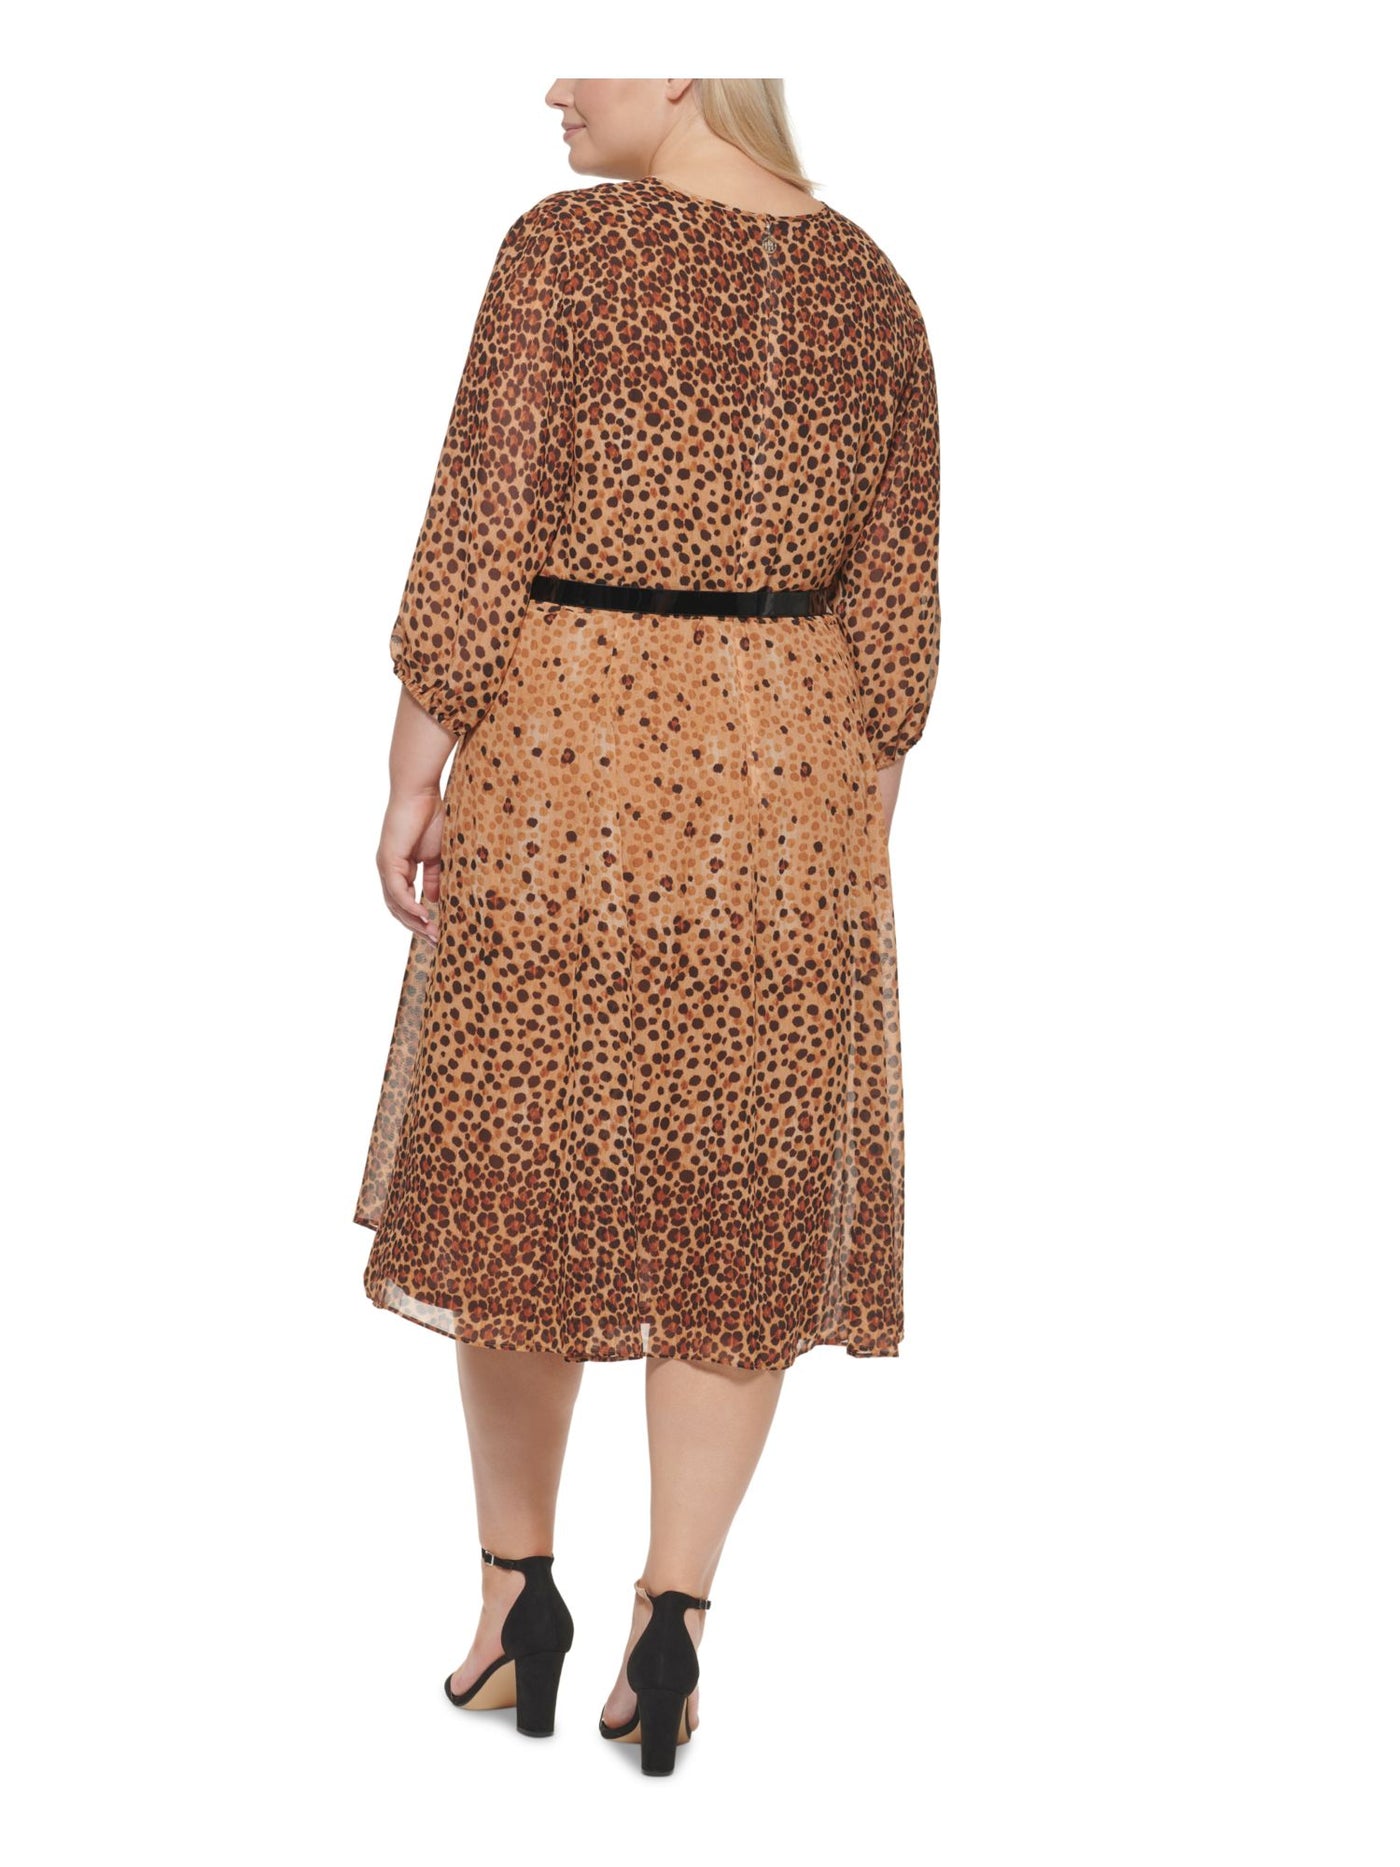 TOMMY HILFIGER Womens Brown Zippered Belted Chiffon Lined Animal Print 3/4 Sleeve Keyhole Midi Wear To Work Fit + Flare Dress Plus 22W